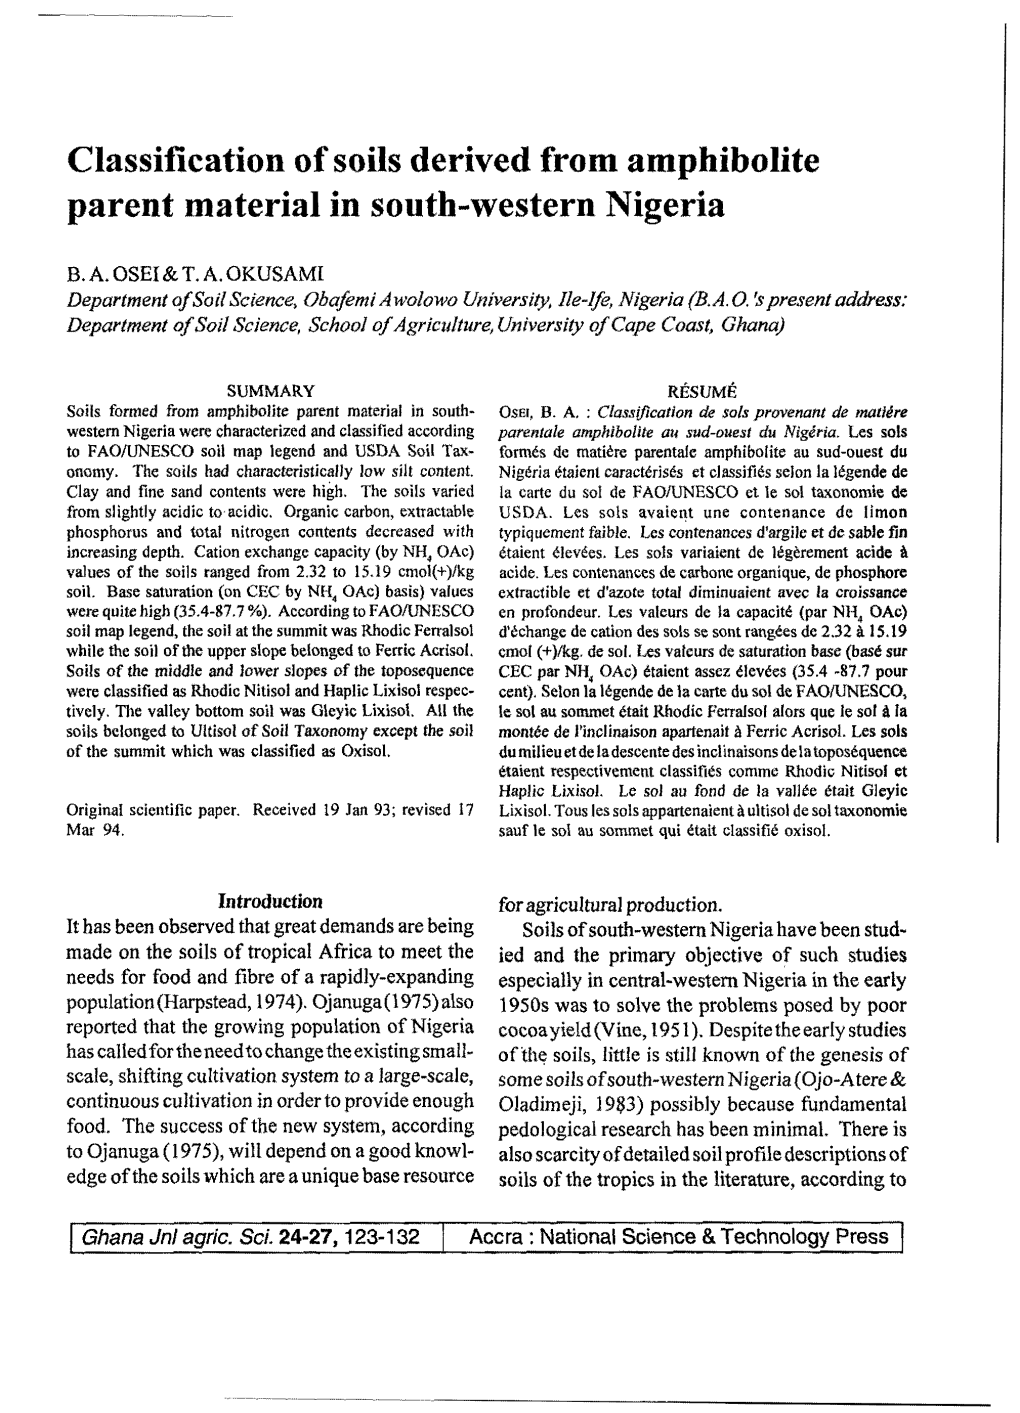 Classification of Soils Derived from Amphibolite Parent Material in South-Western Nigeria